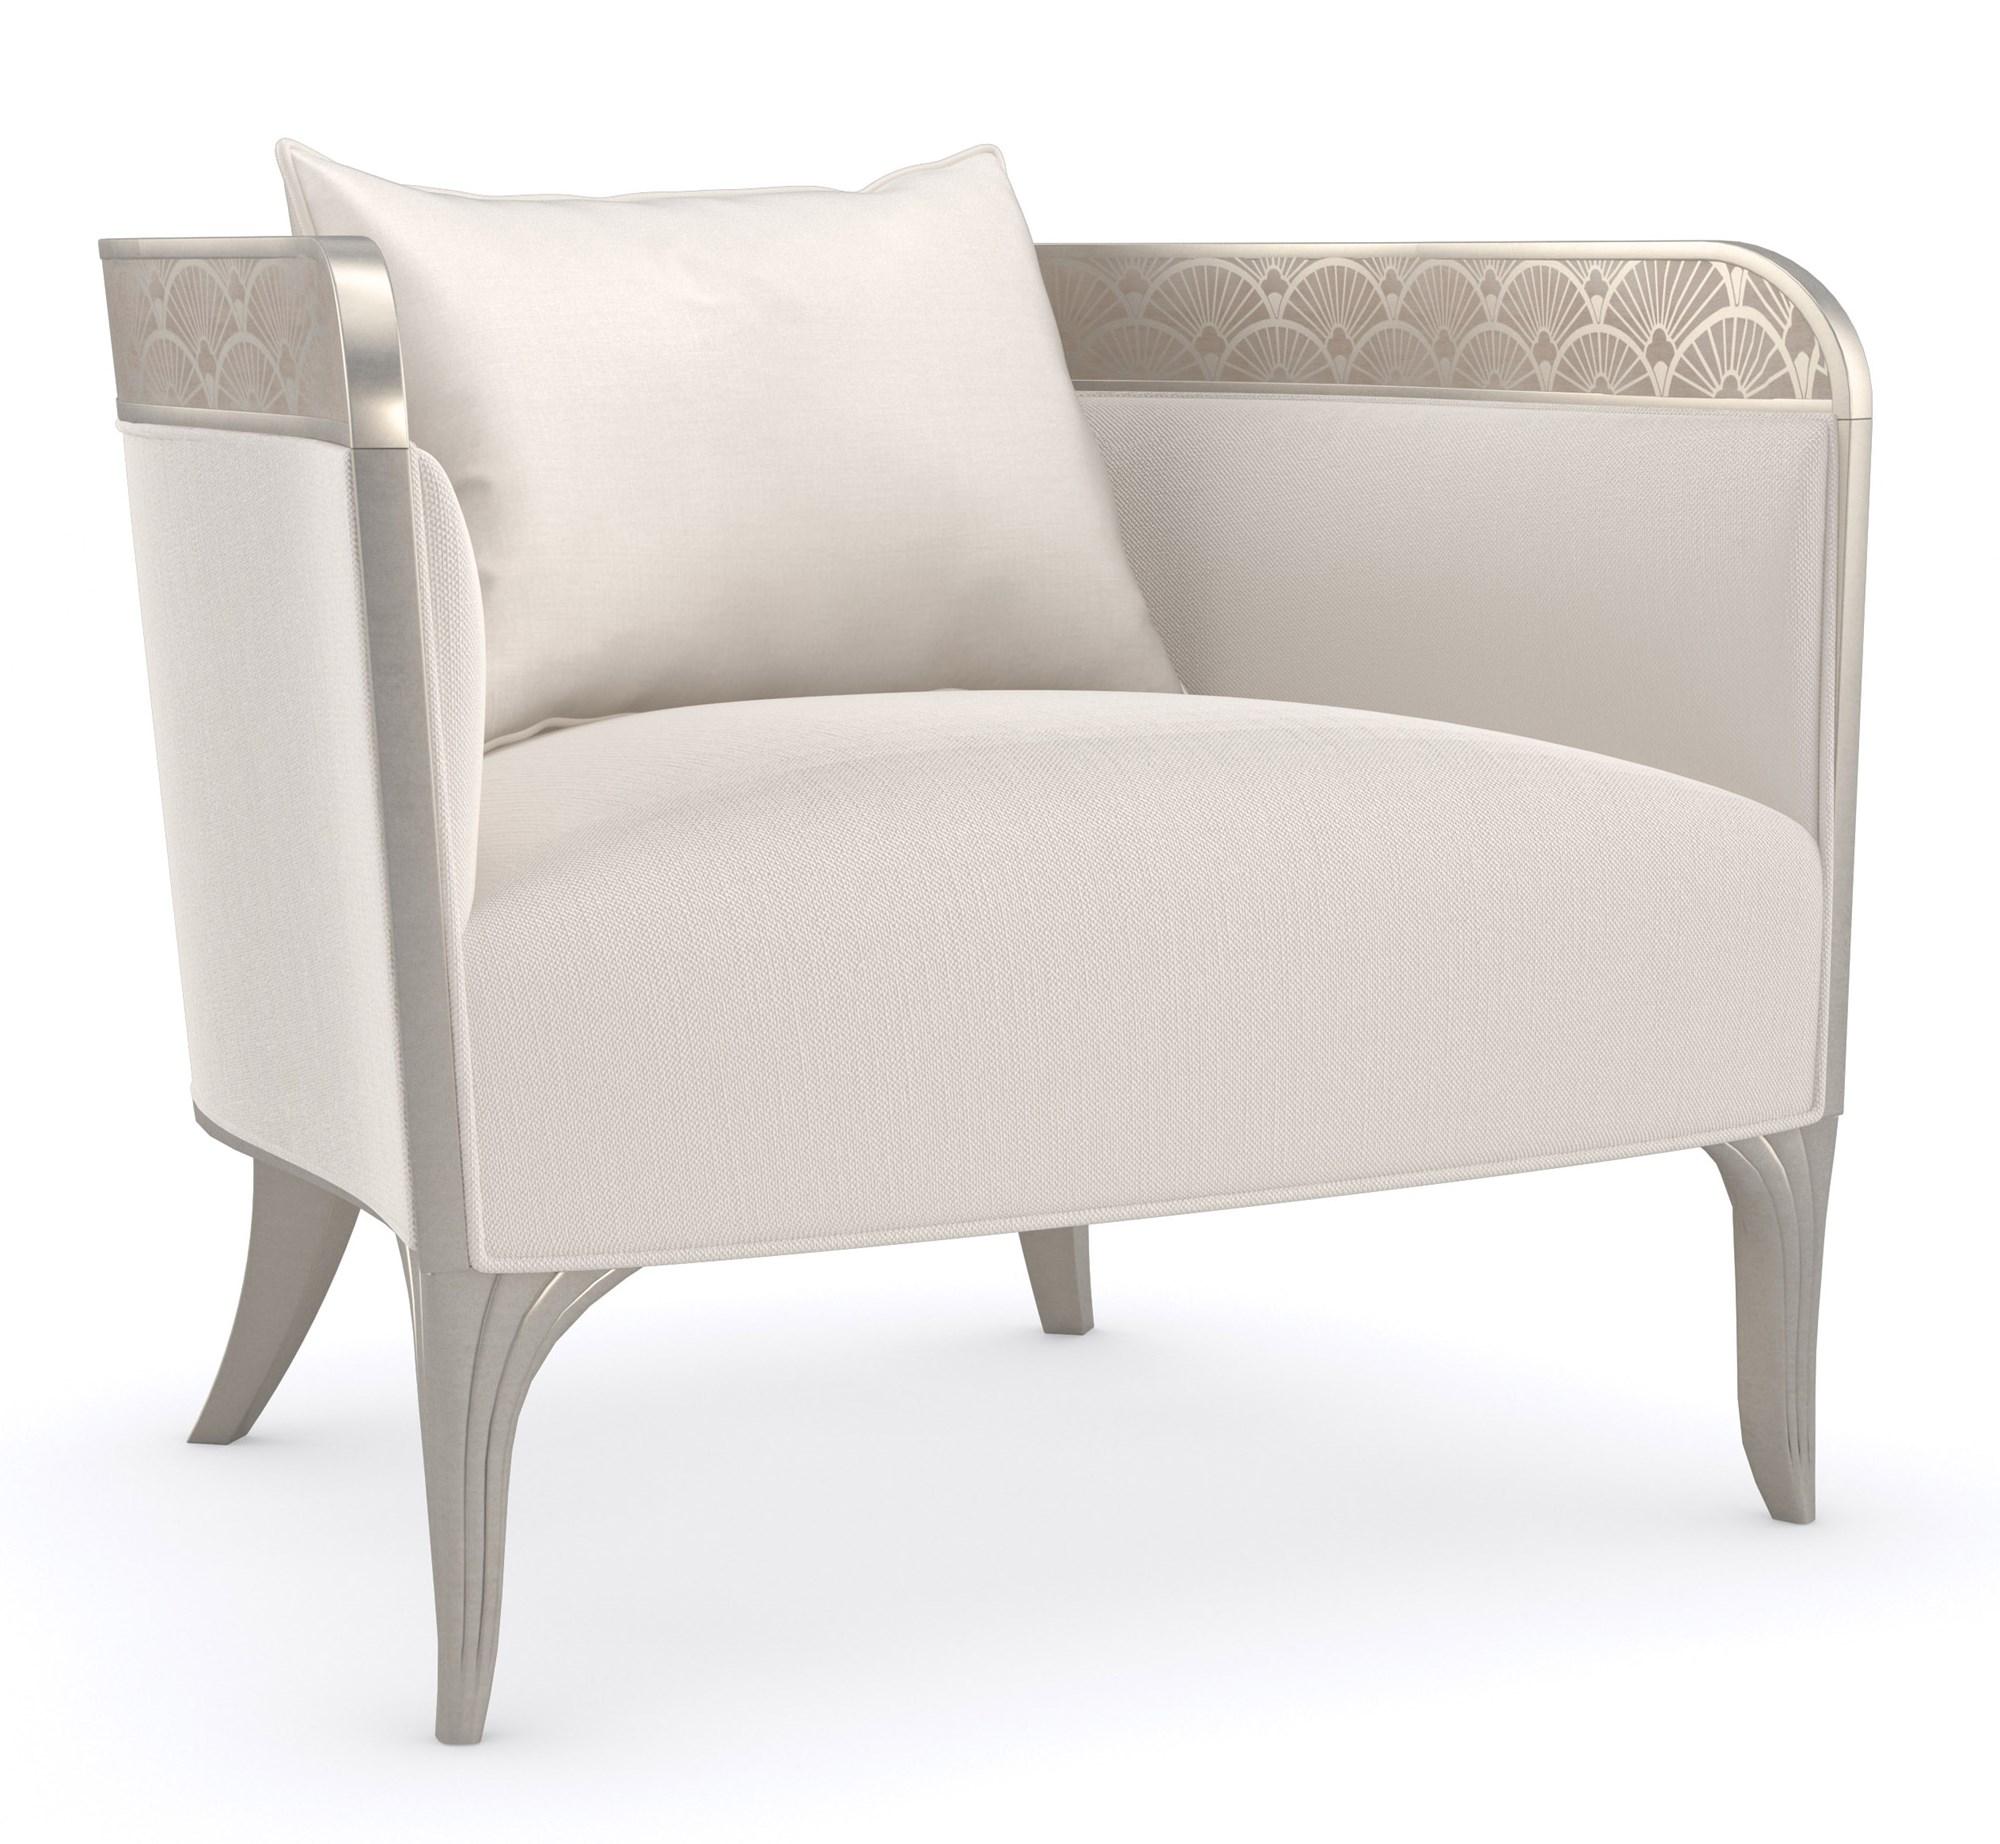 Traditional Arm Chairs LILLIAN C090-020-131-A in Cream Fabric